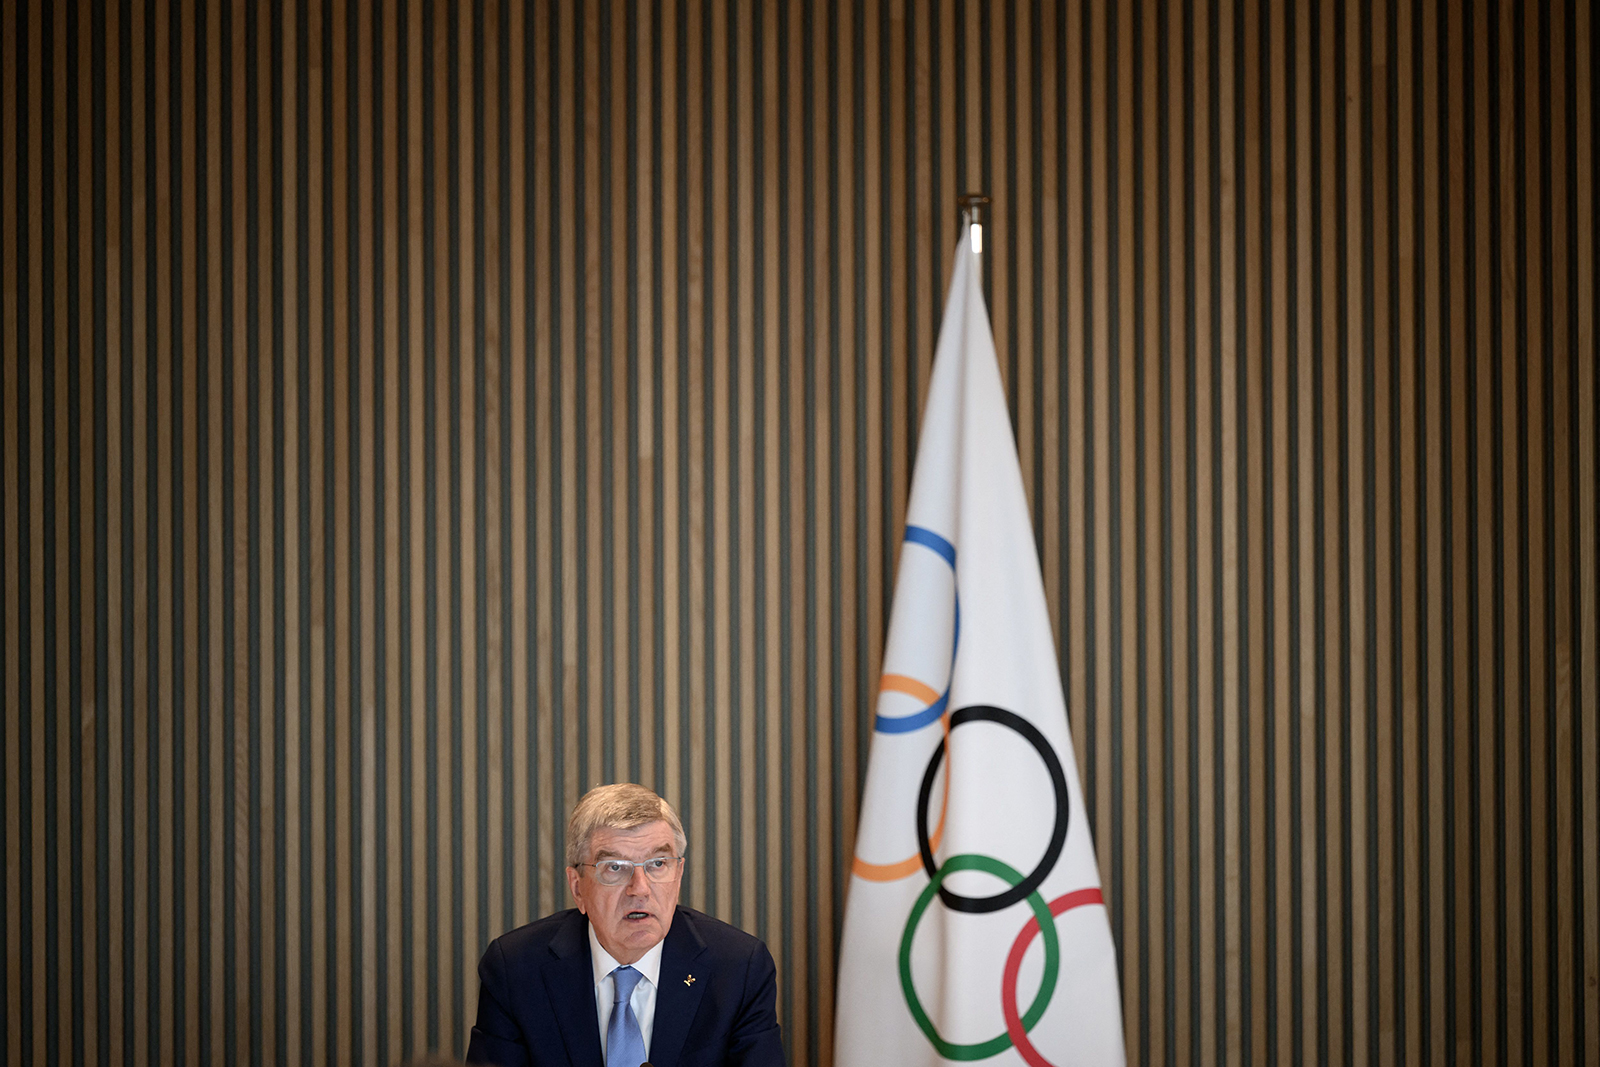 Thomas Bach speaks during an IOC executive board meeting in Lausanne, Switzerland, on March 28.